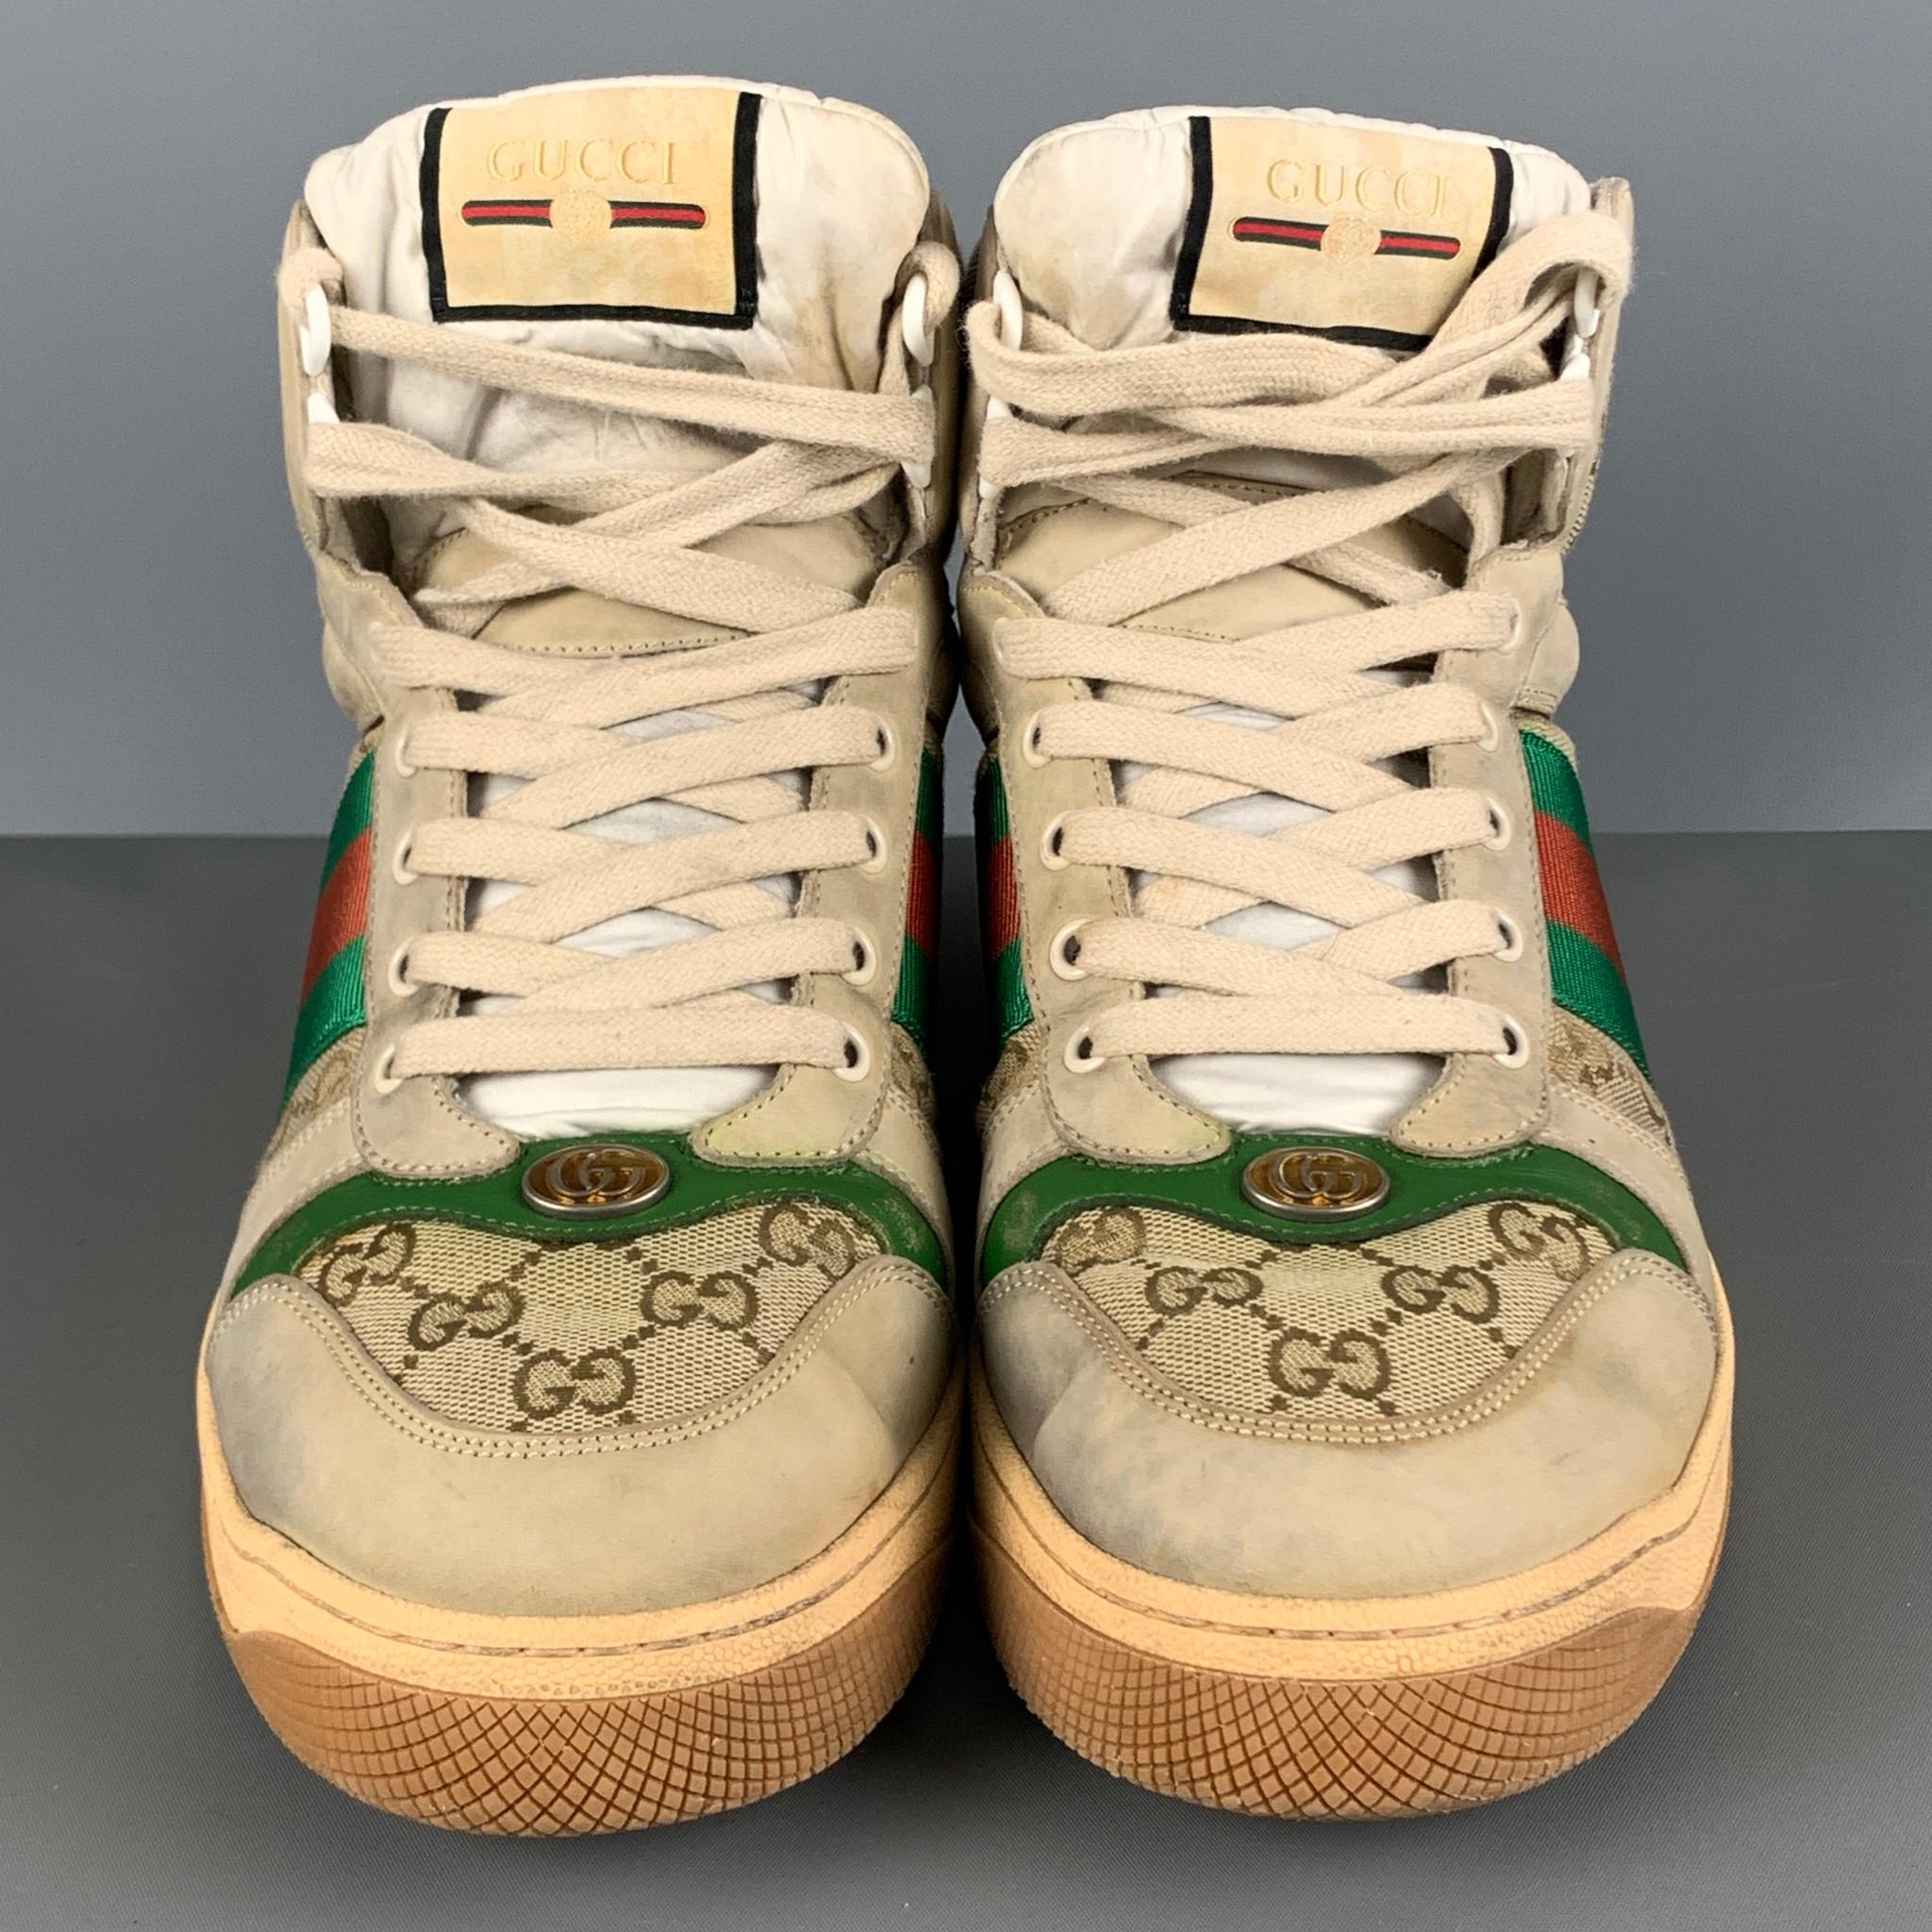 GUCCI Size 10.5 Tan Green & Red Distressed Canvas High Top Sneakers 1